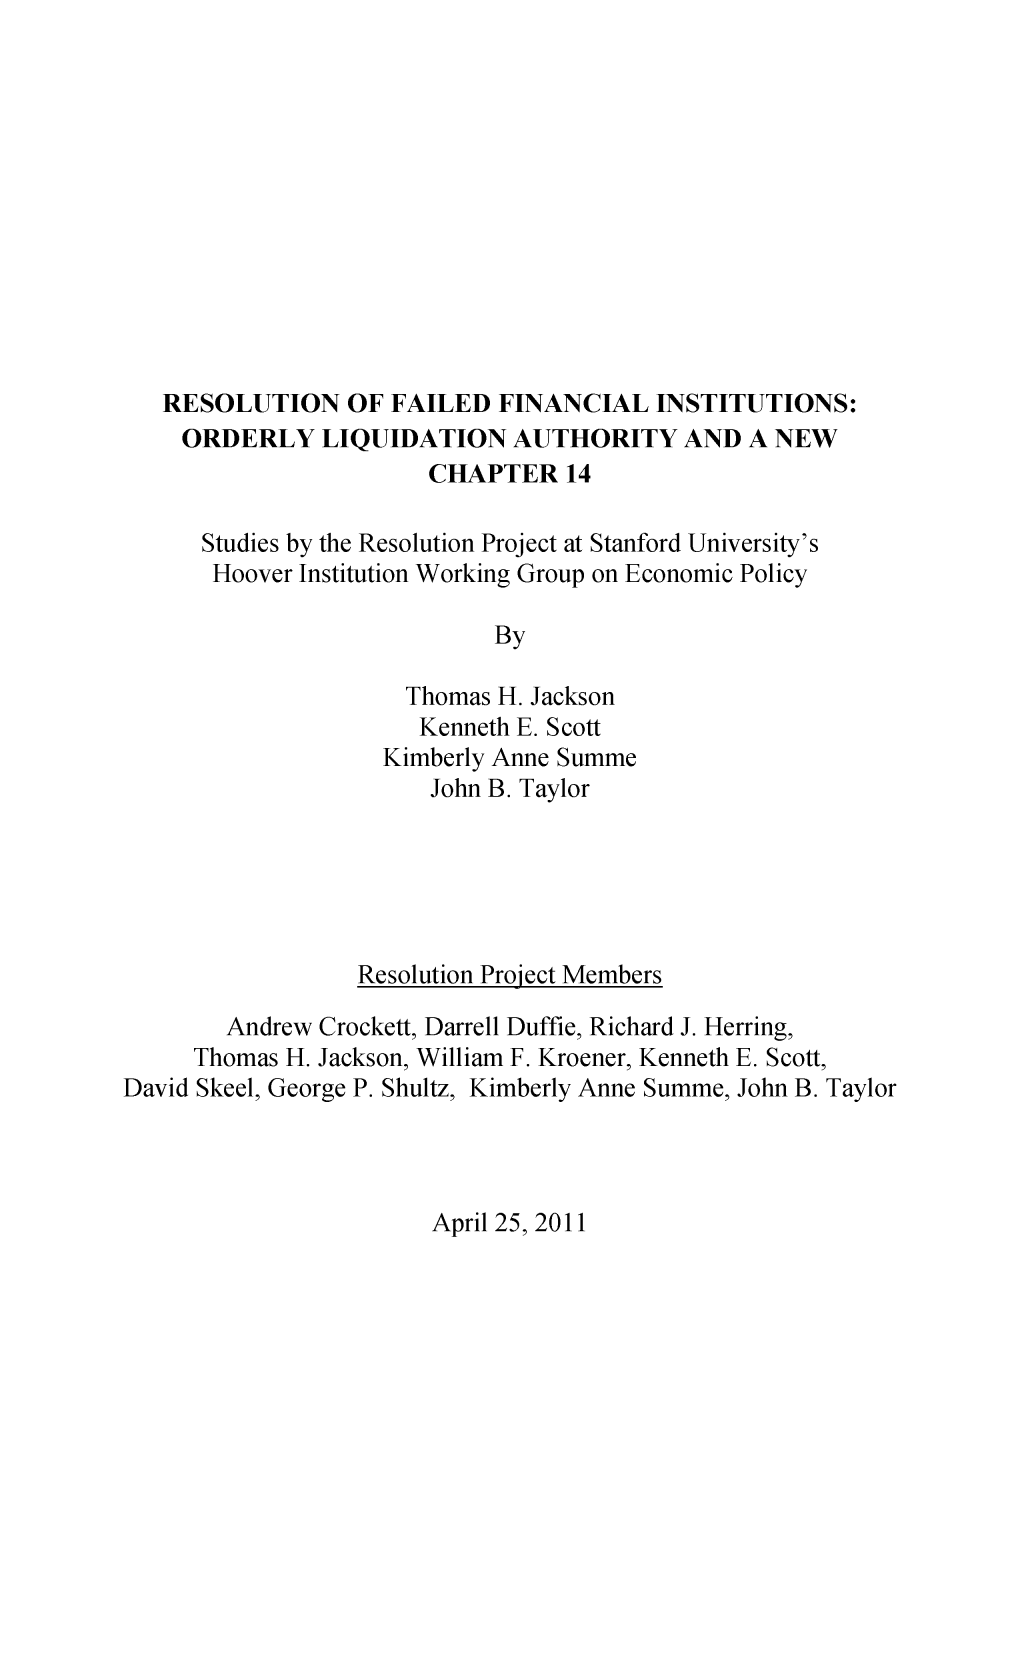 Resolution of Failed Financial Institutions: Orderly Liquidation Authority and a New Chapter 14